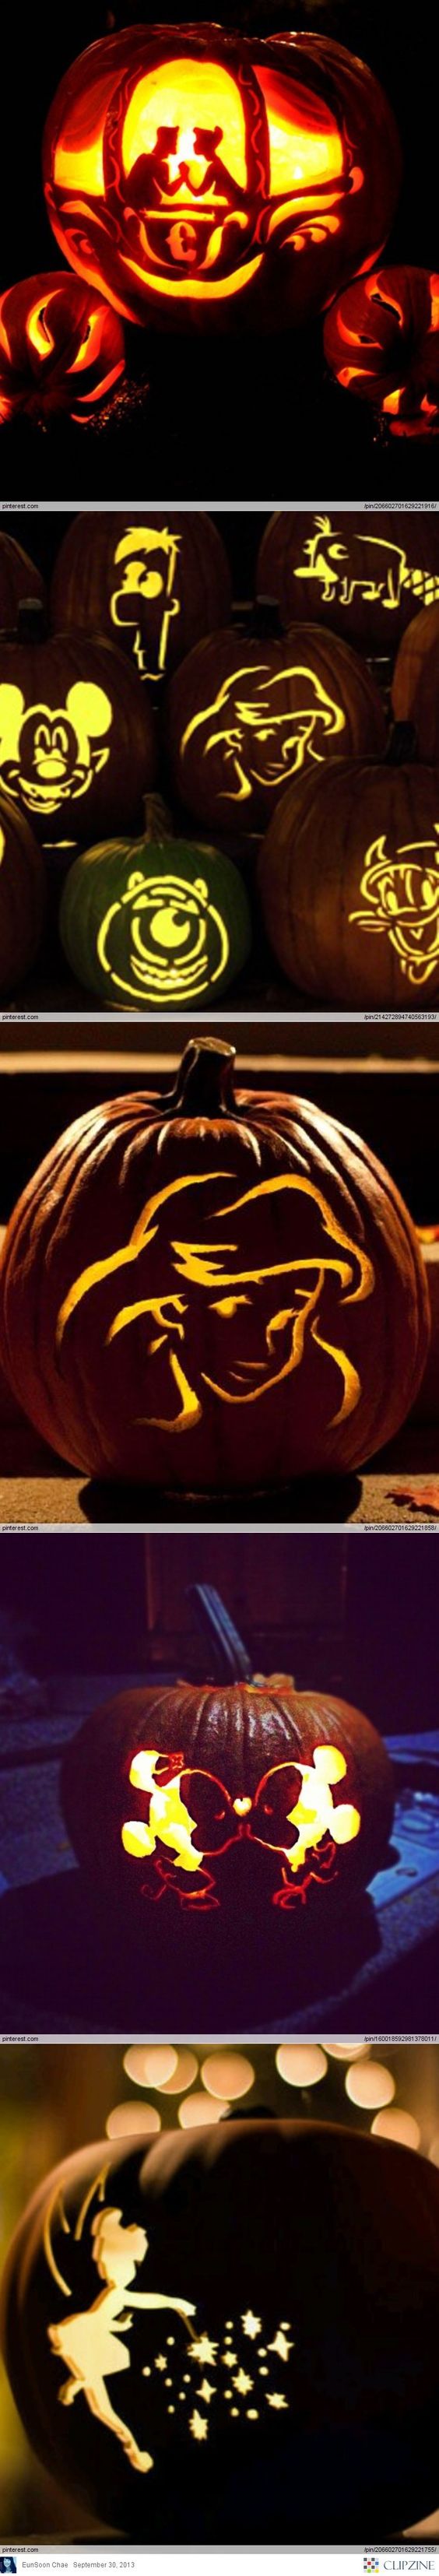 75. CINDERELLA PUMPKIN CARVINGS AMONG OTHER FAIRY TALE INSPIRED CARVINGS